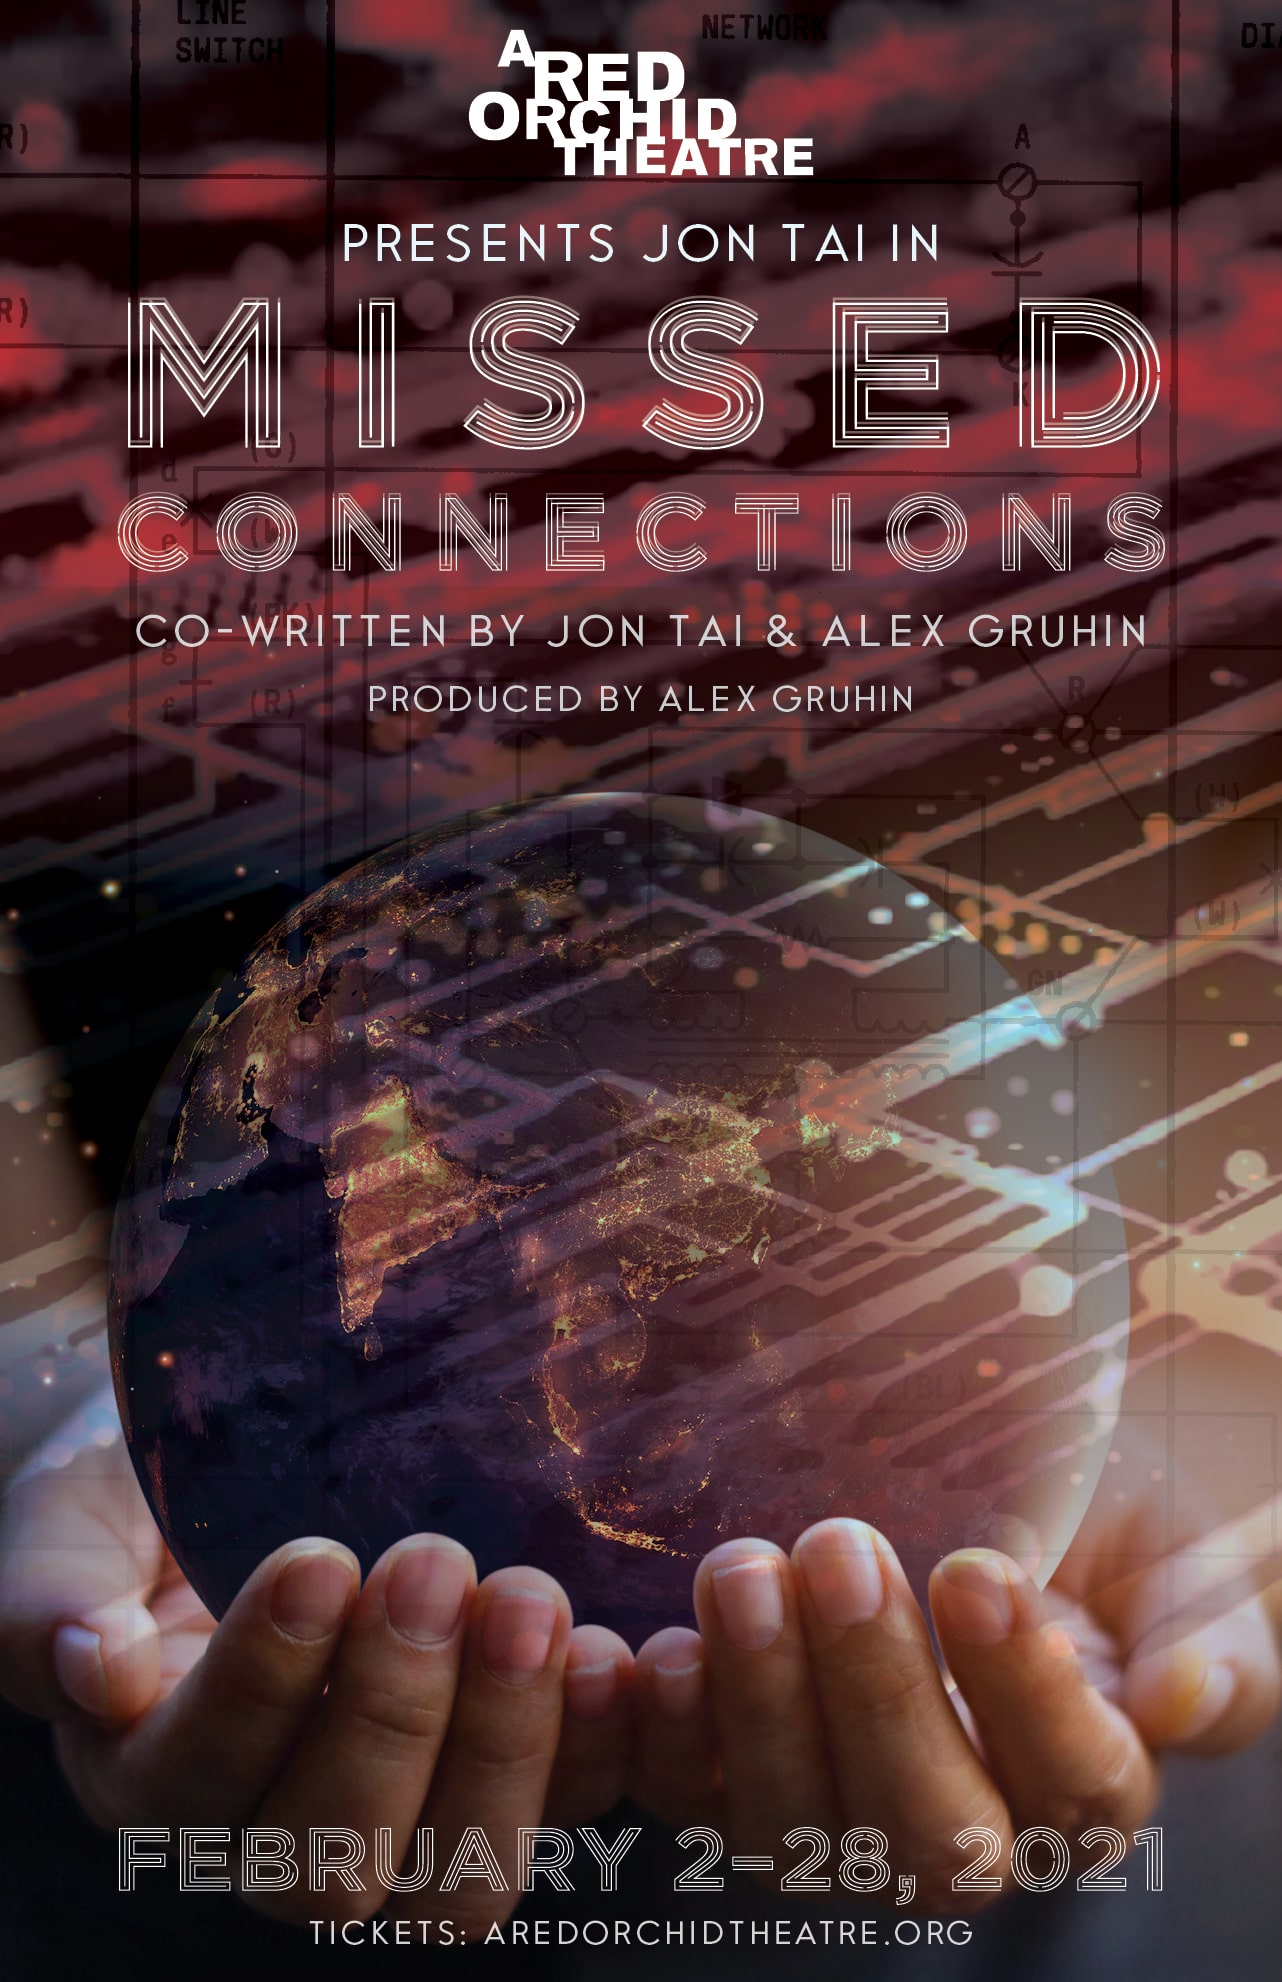 Missed Connections promo poster.